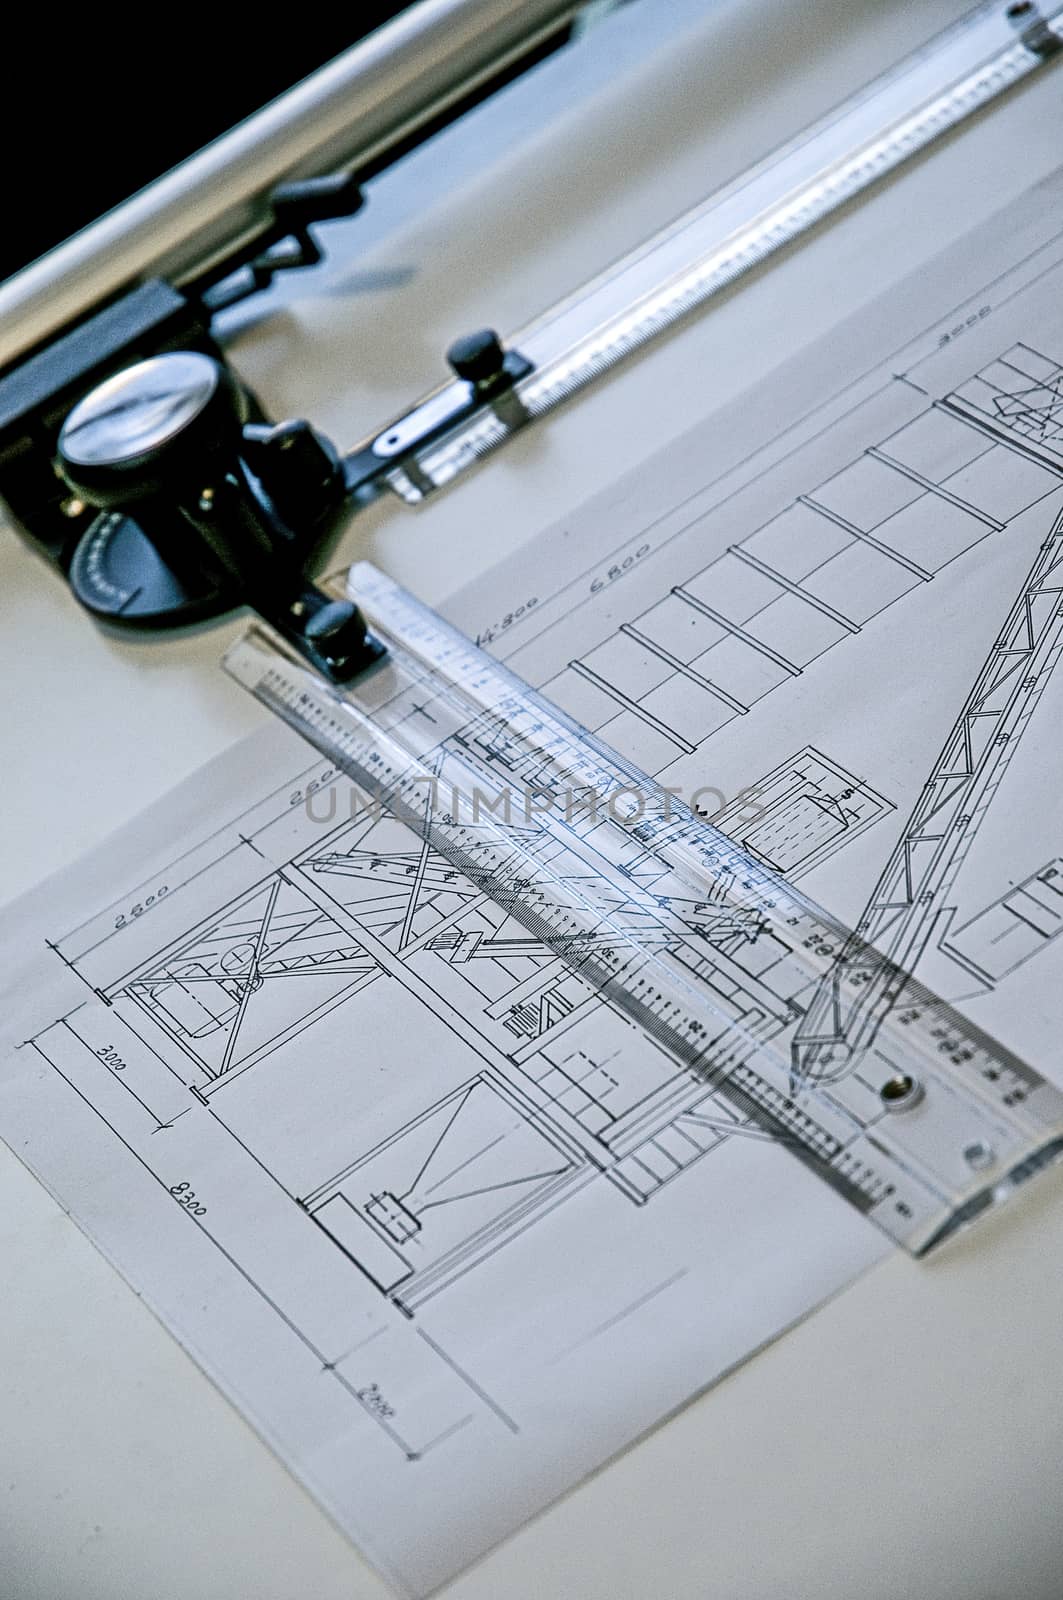 The value of handmade work of the past. A technical drawing of a project made entirely by hand on an old table-top desk, ingenuity and passion for one's work